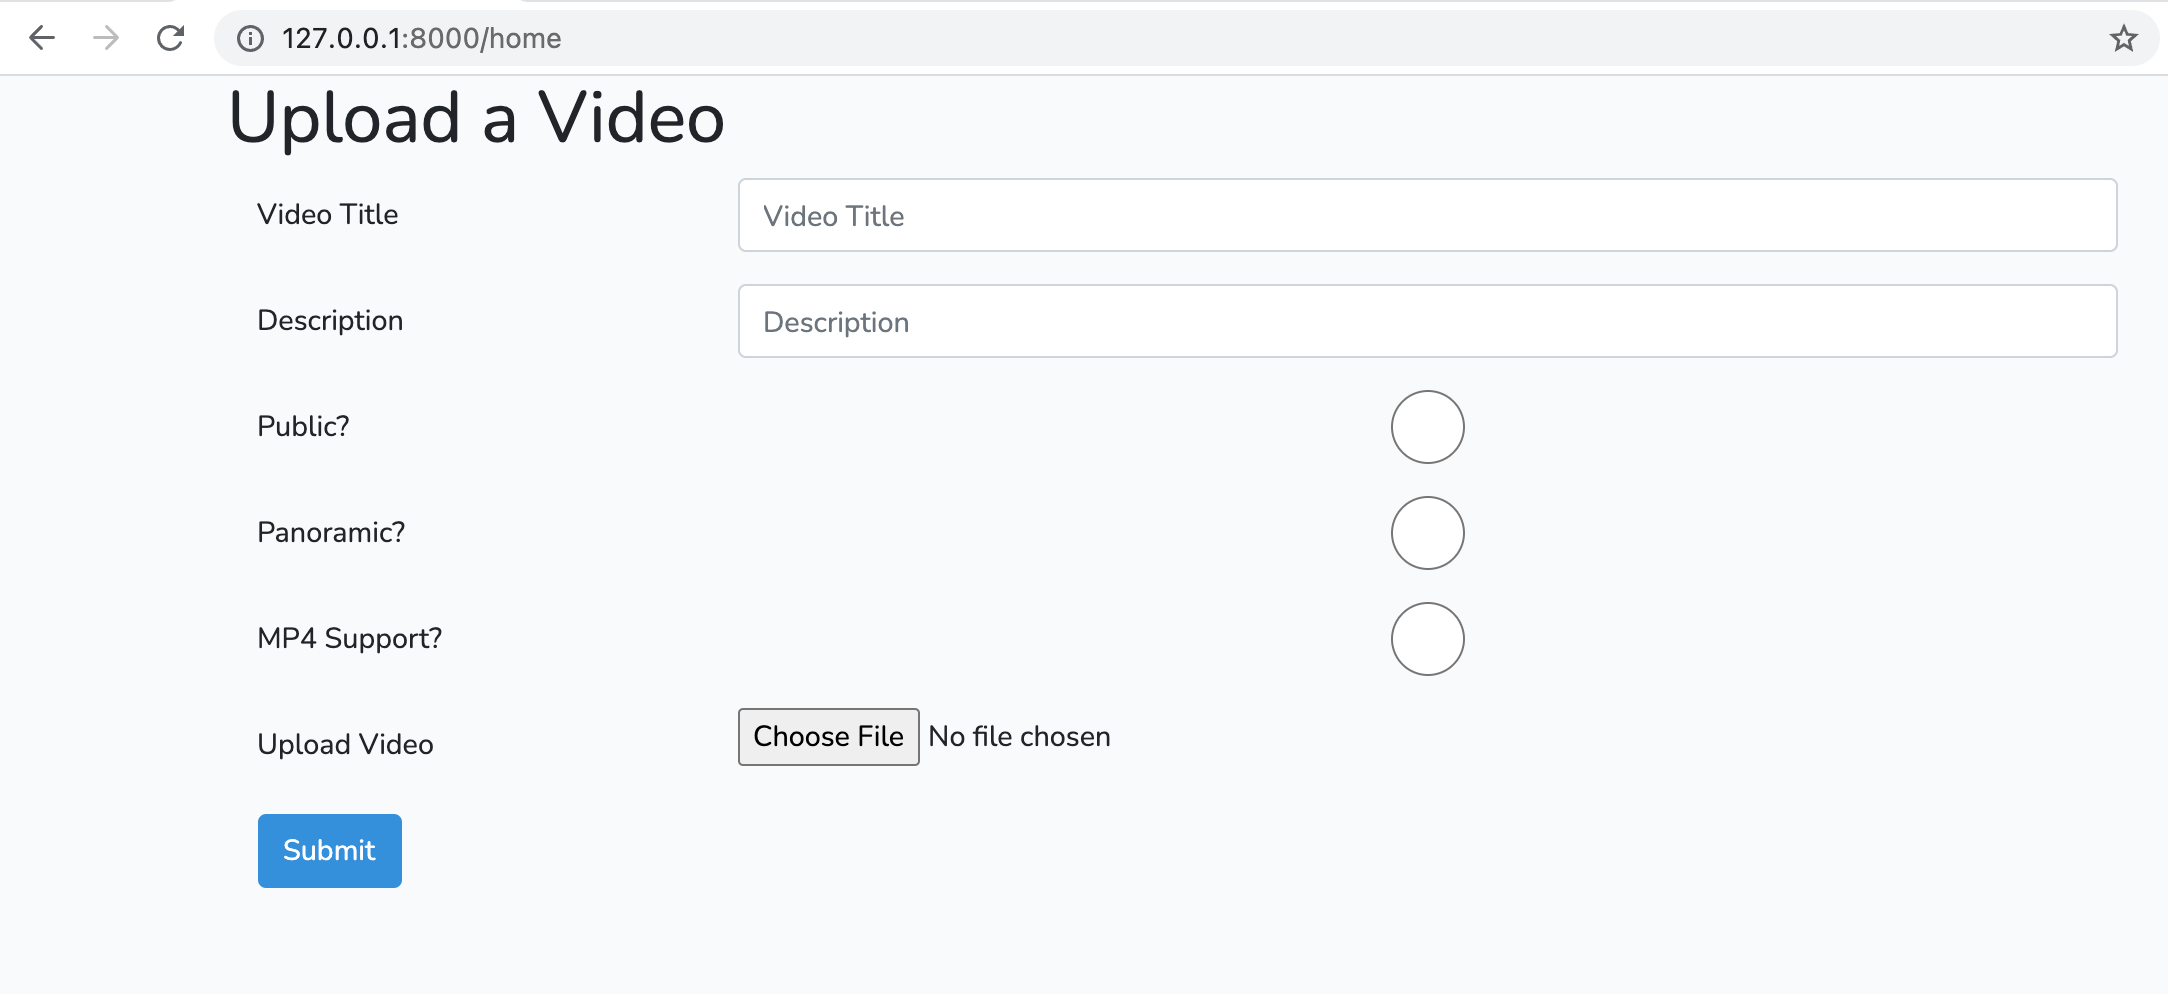 Image of upload form showing available fields